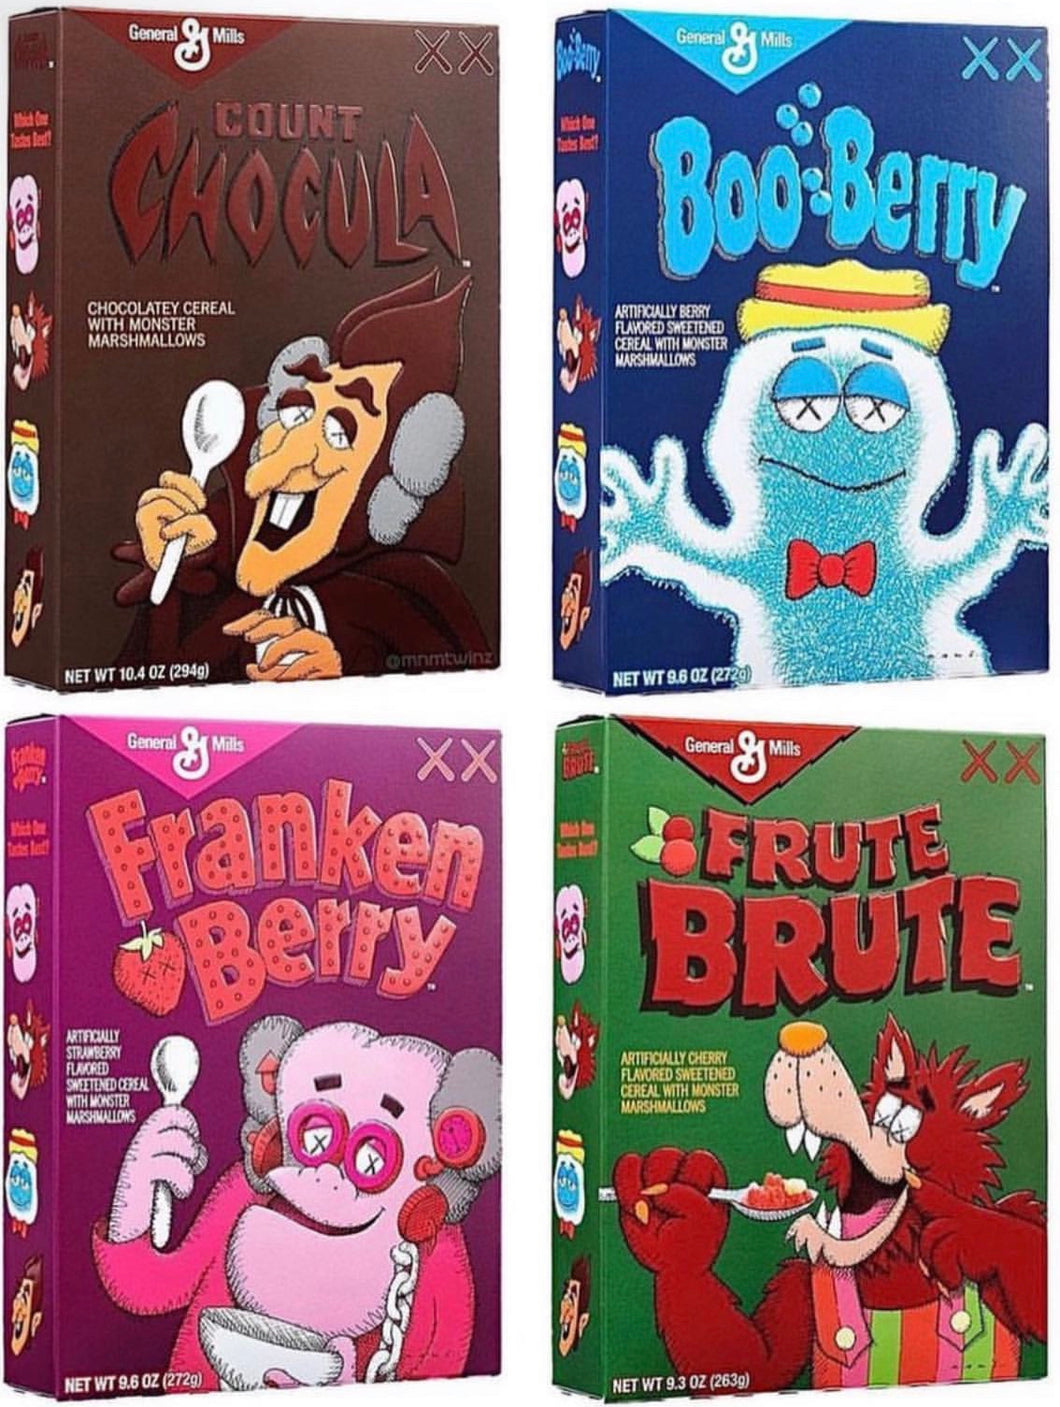 Kaws “Monsters Cereal Boxes”